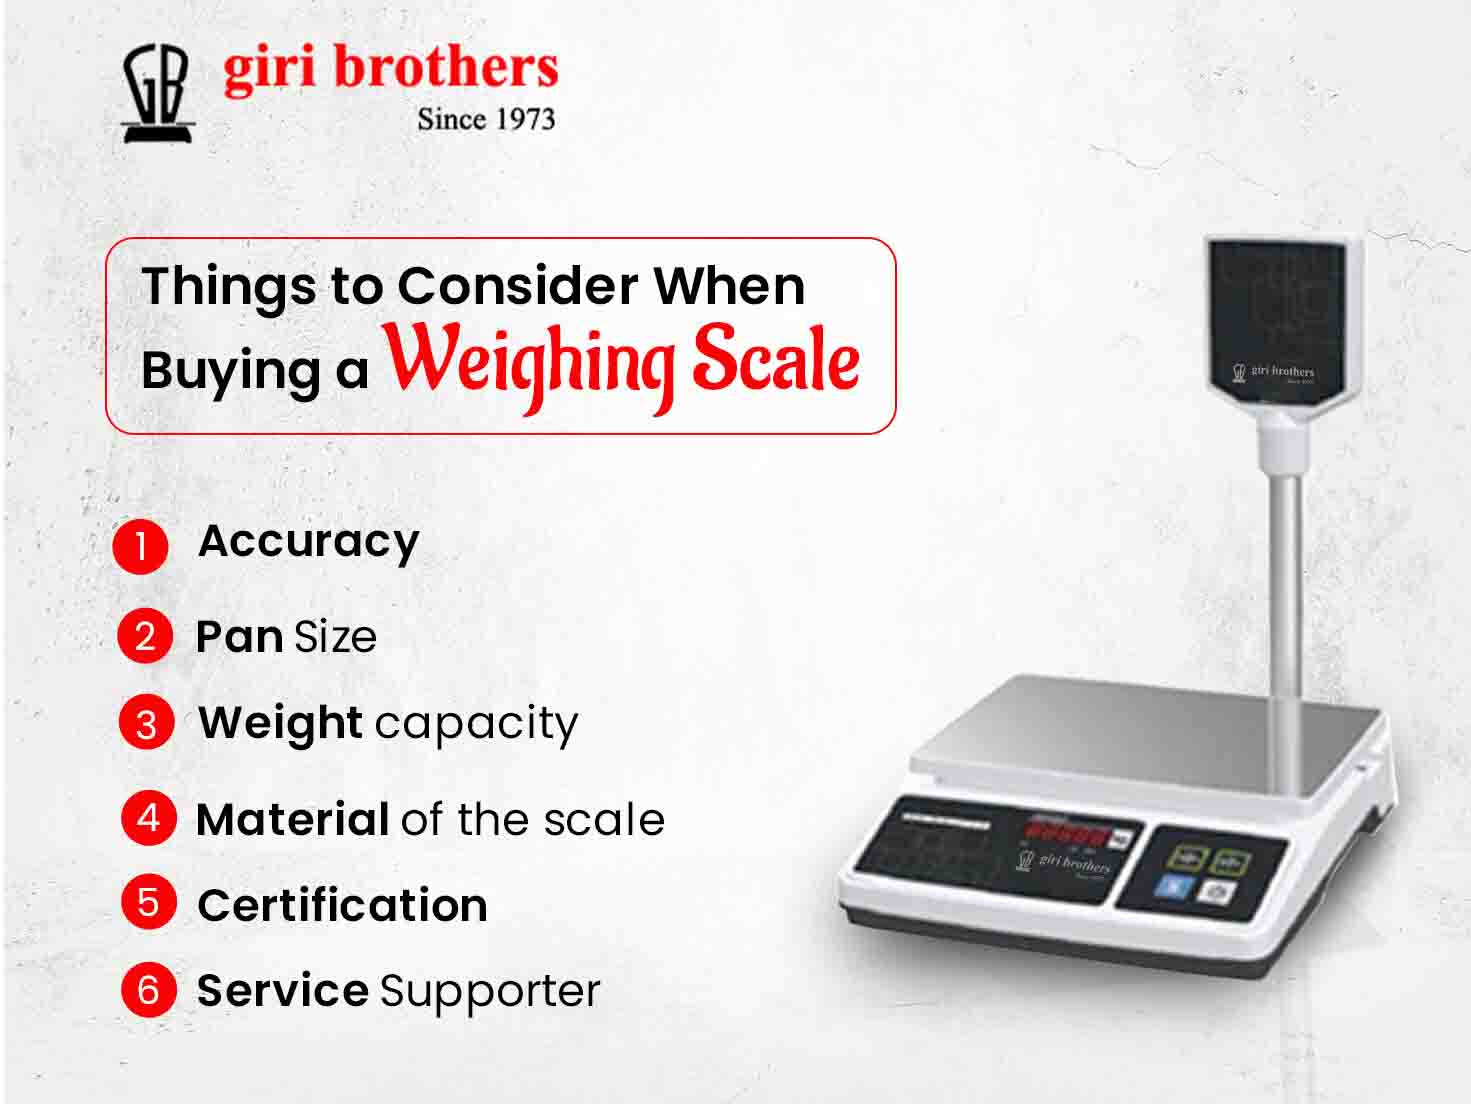 Things to consider before buying a weighing scale